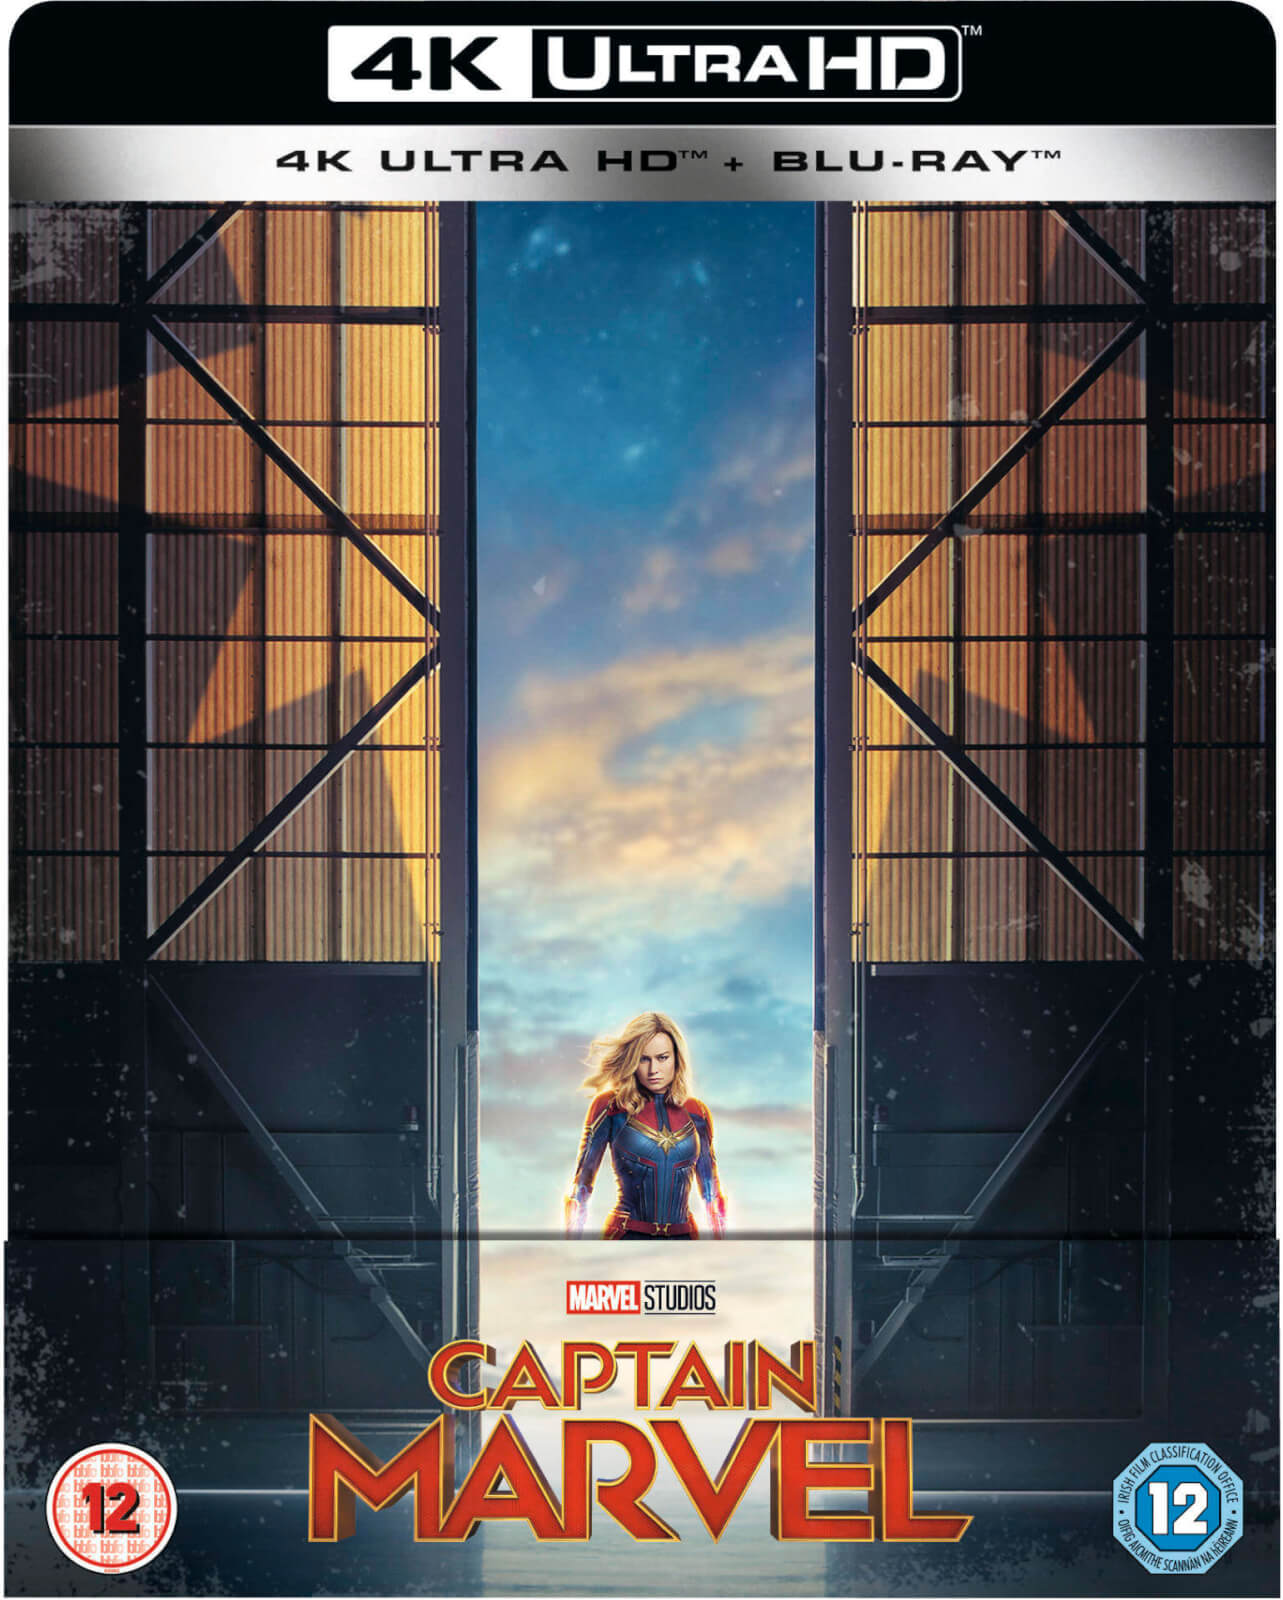 Captain Marvel 4K Ultra HD (Includes 2D Blu-ray) - Zavvi Exclusive Limited Edition SteelBook